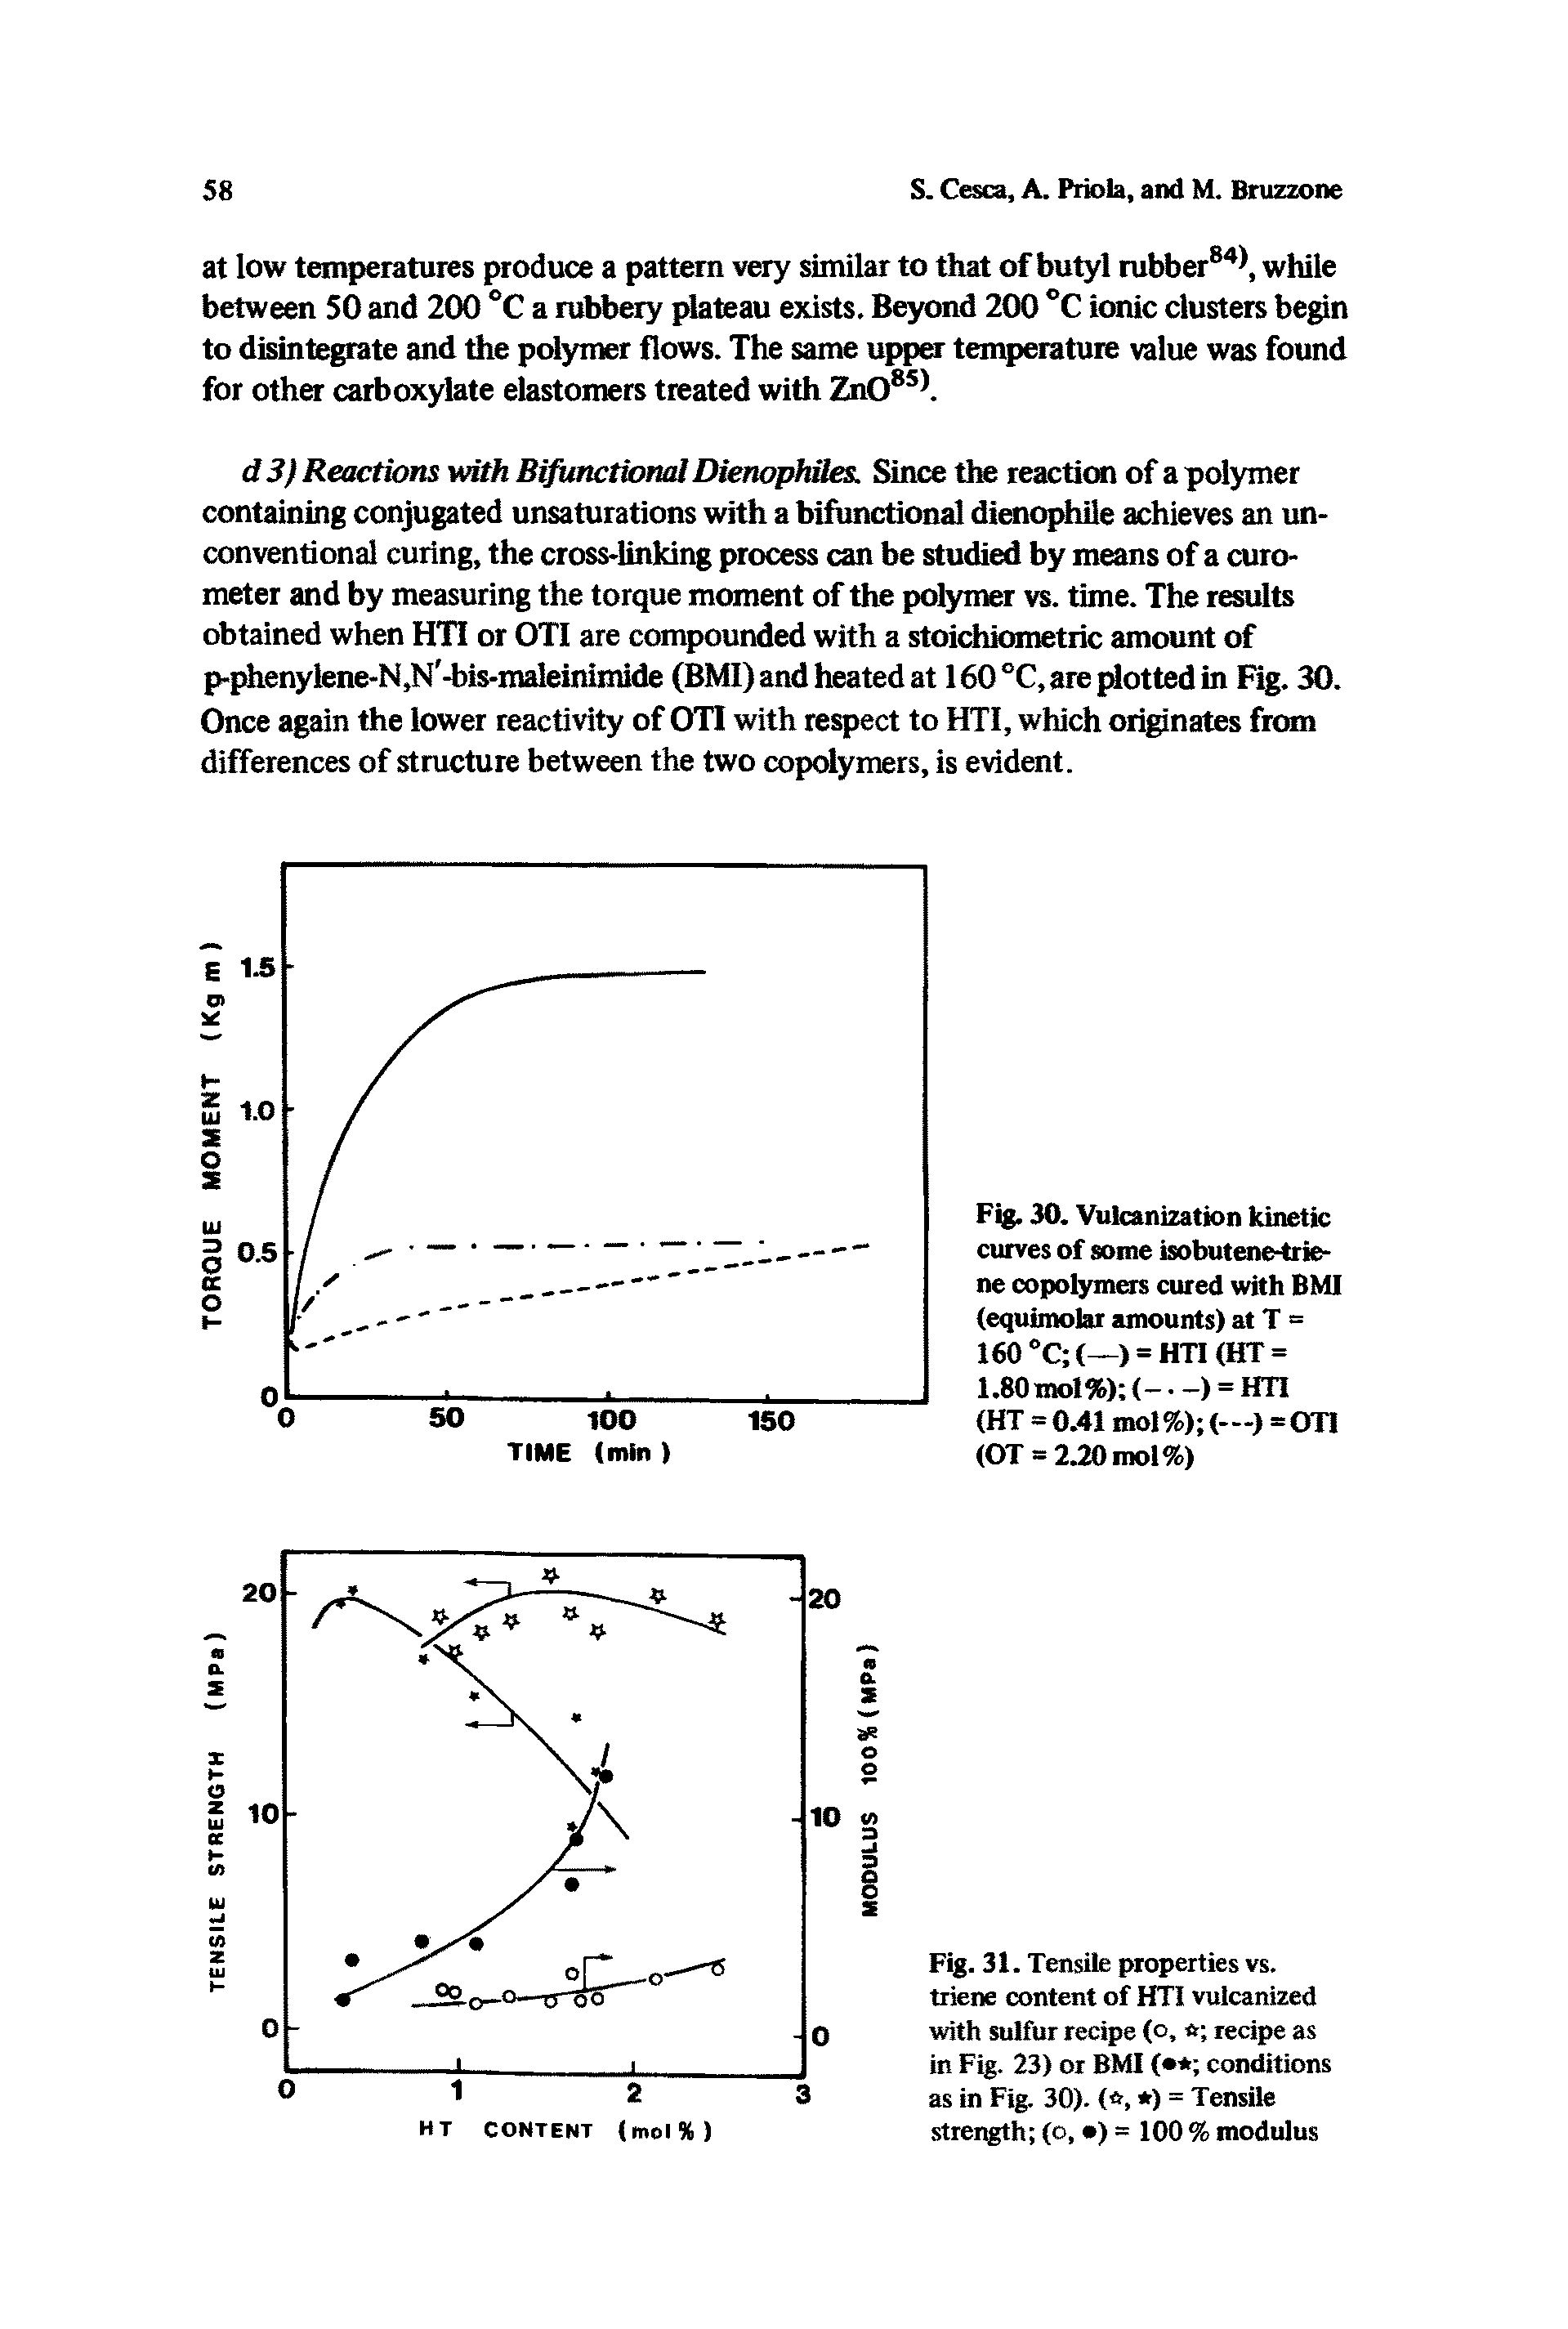 Fig. 30. Vulcanization kinetic curves of some isobutene4rie-ne copolymers cured with BMI (equimolar amounts) at T = 160°C (—) = HTI(HT =...